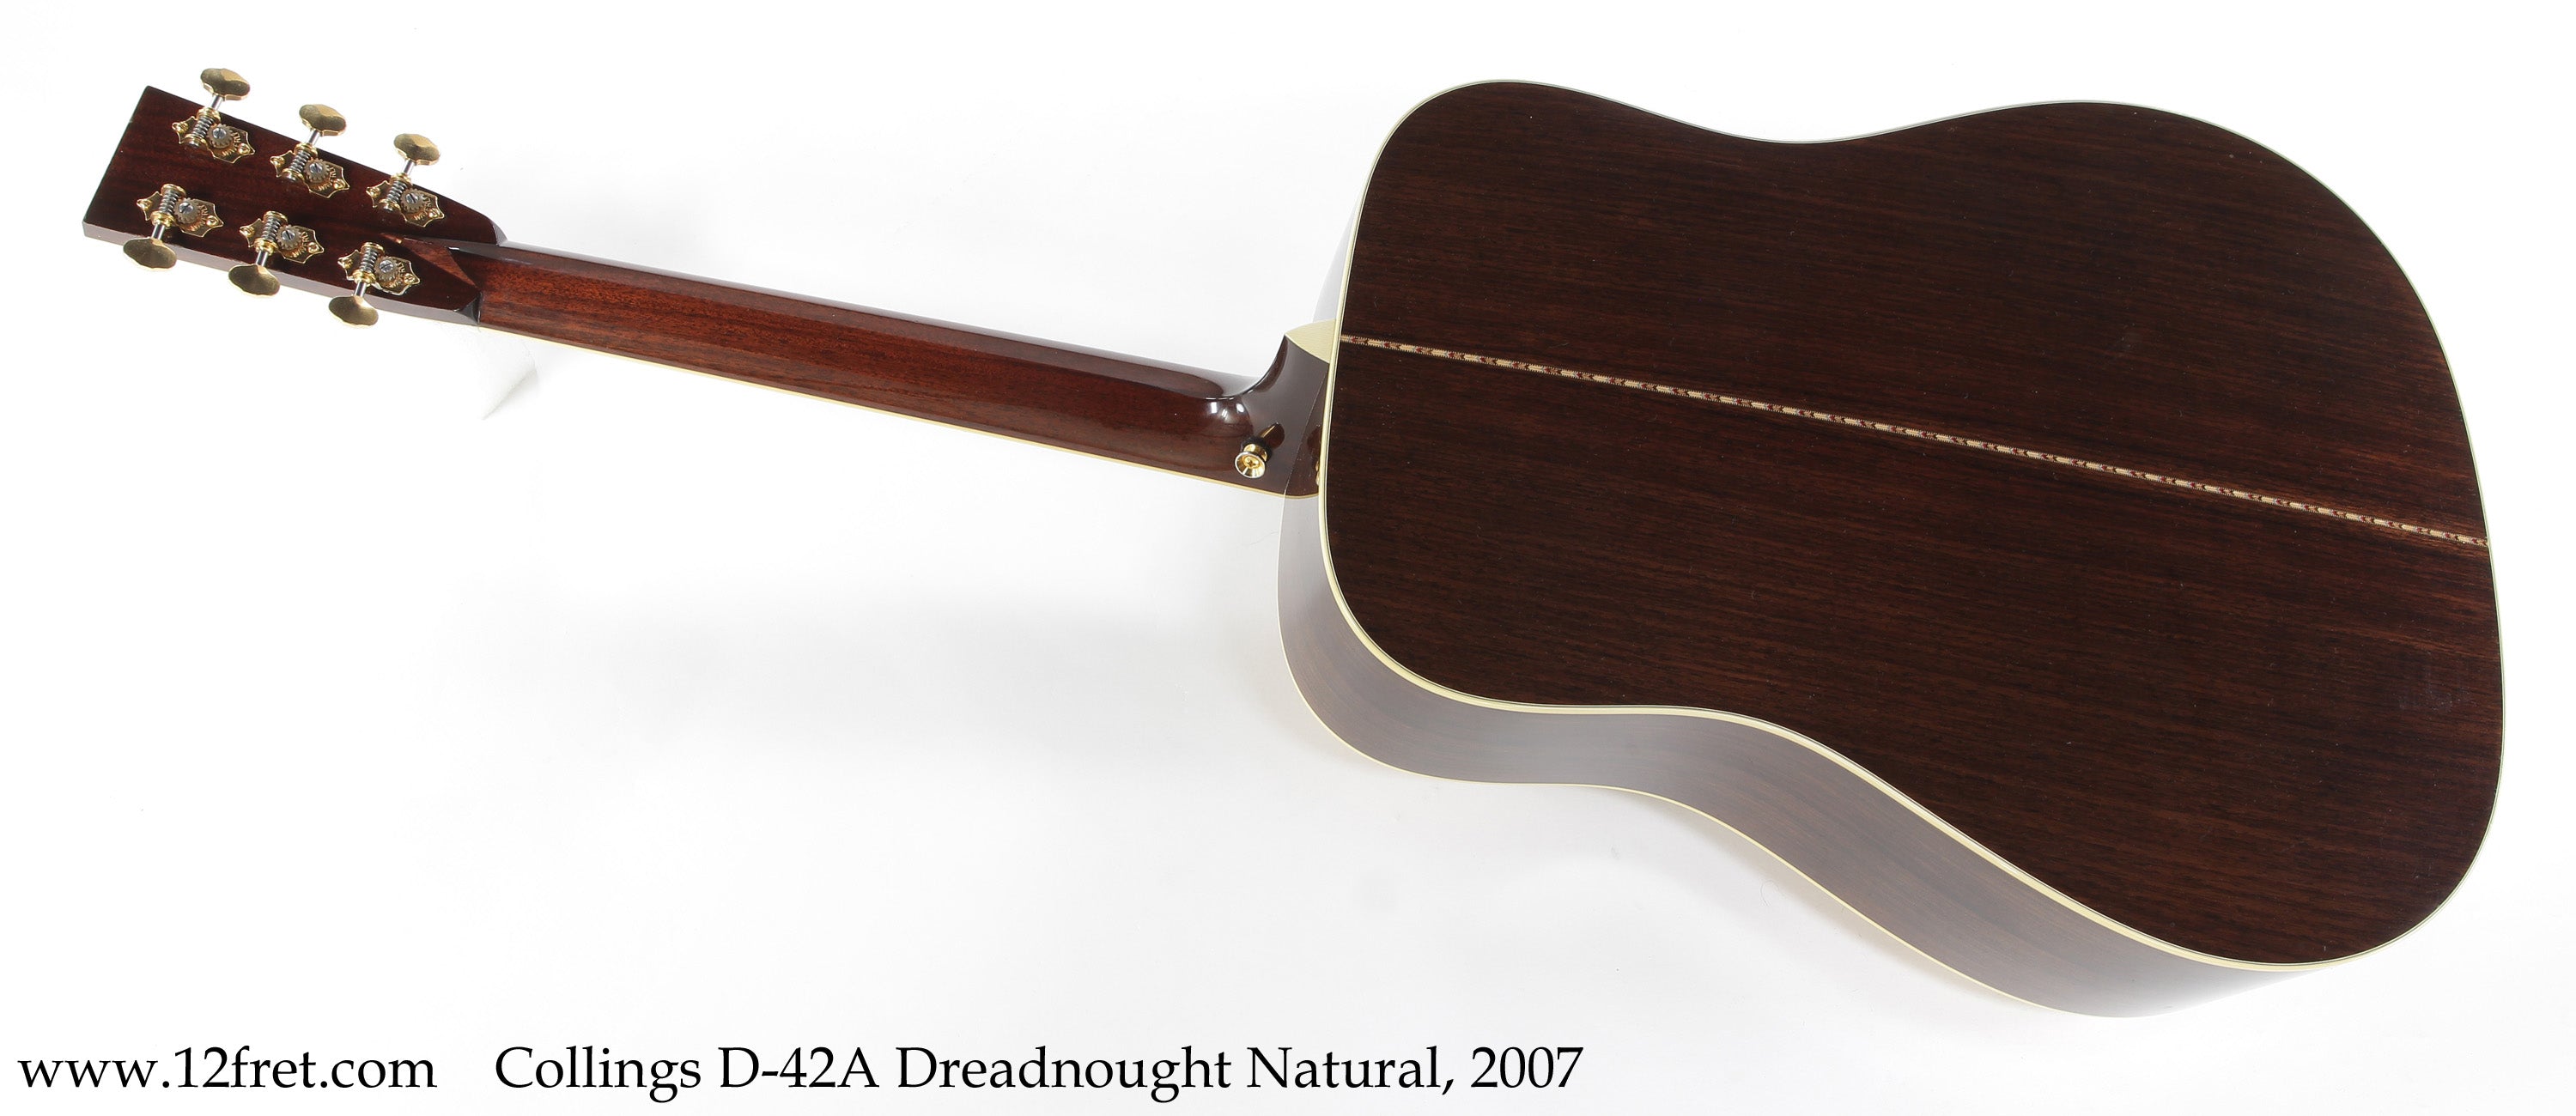 Collings D-42A Dreadnought Natural, 2007 - The Twelfth Fret